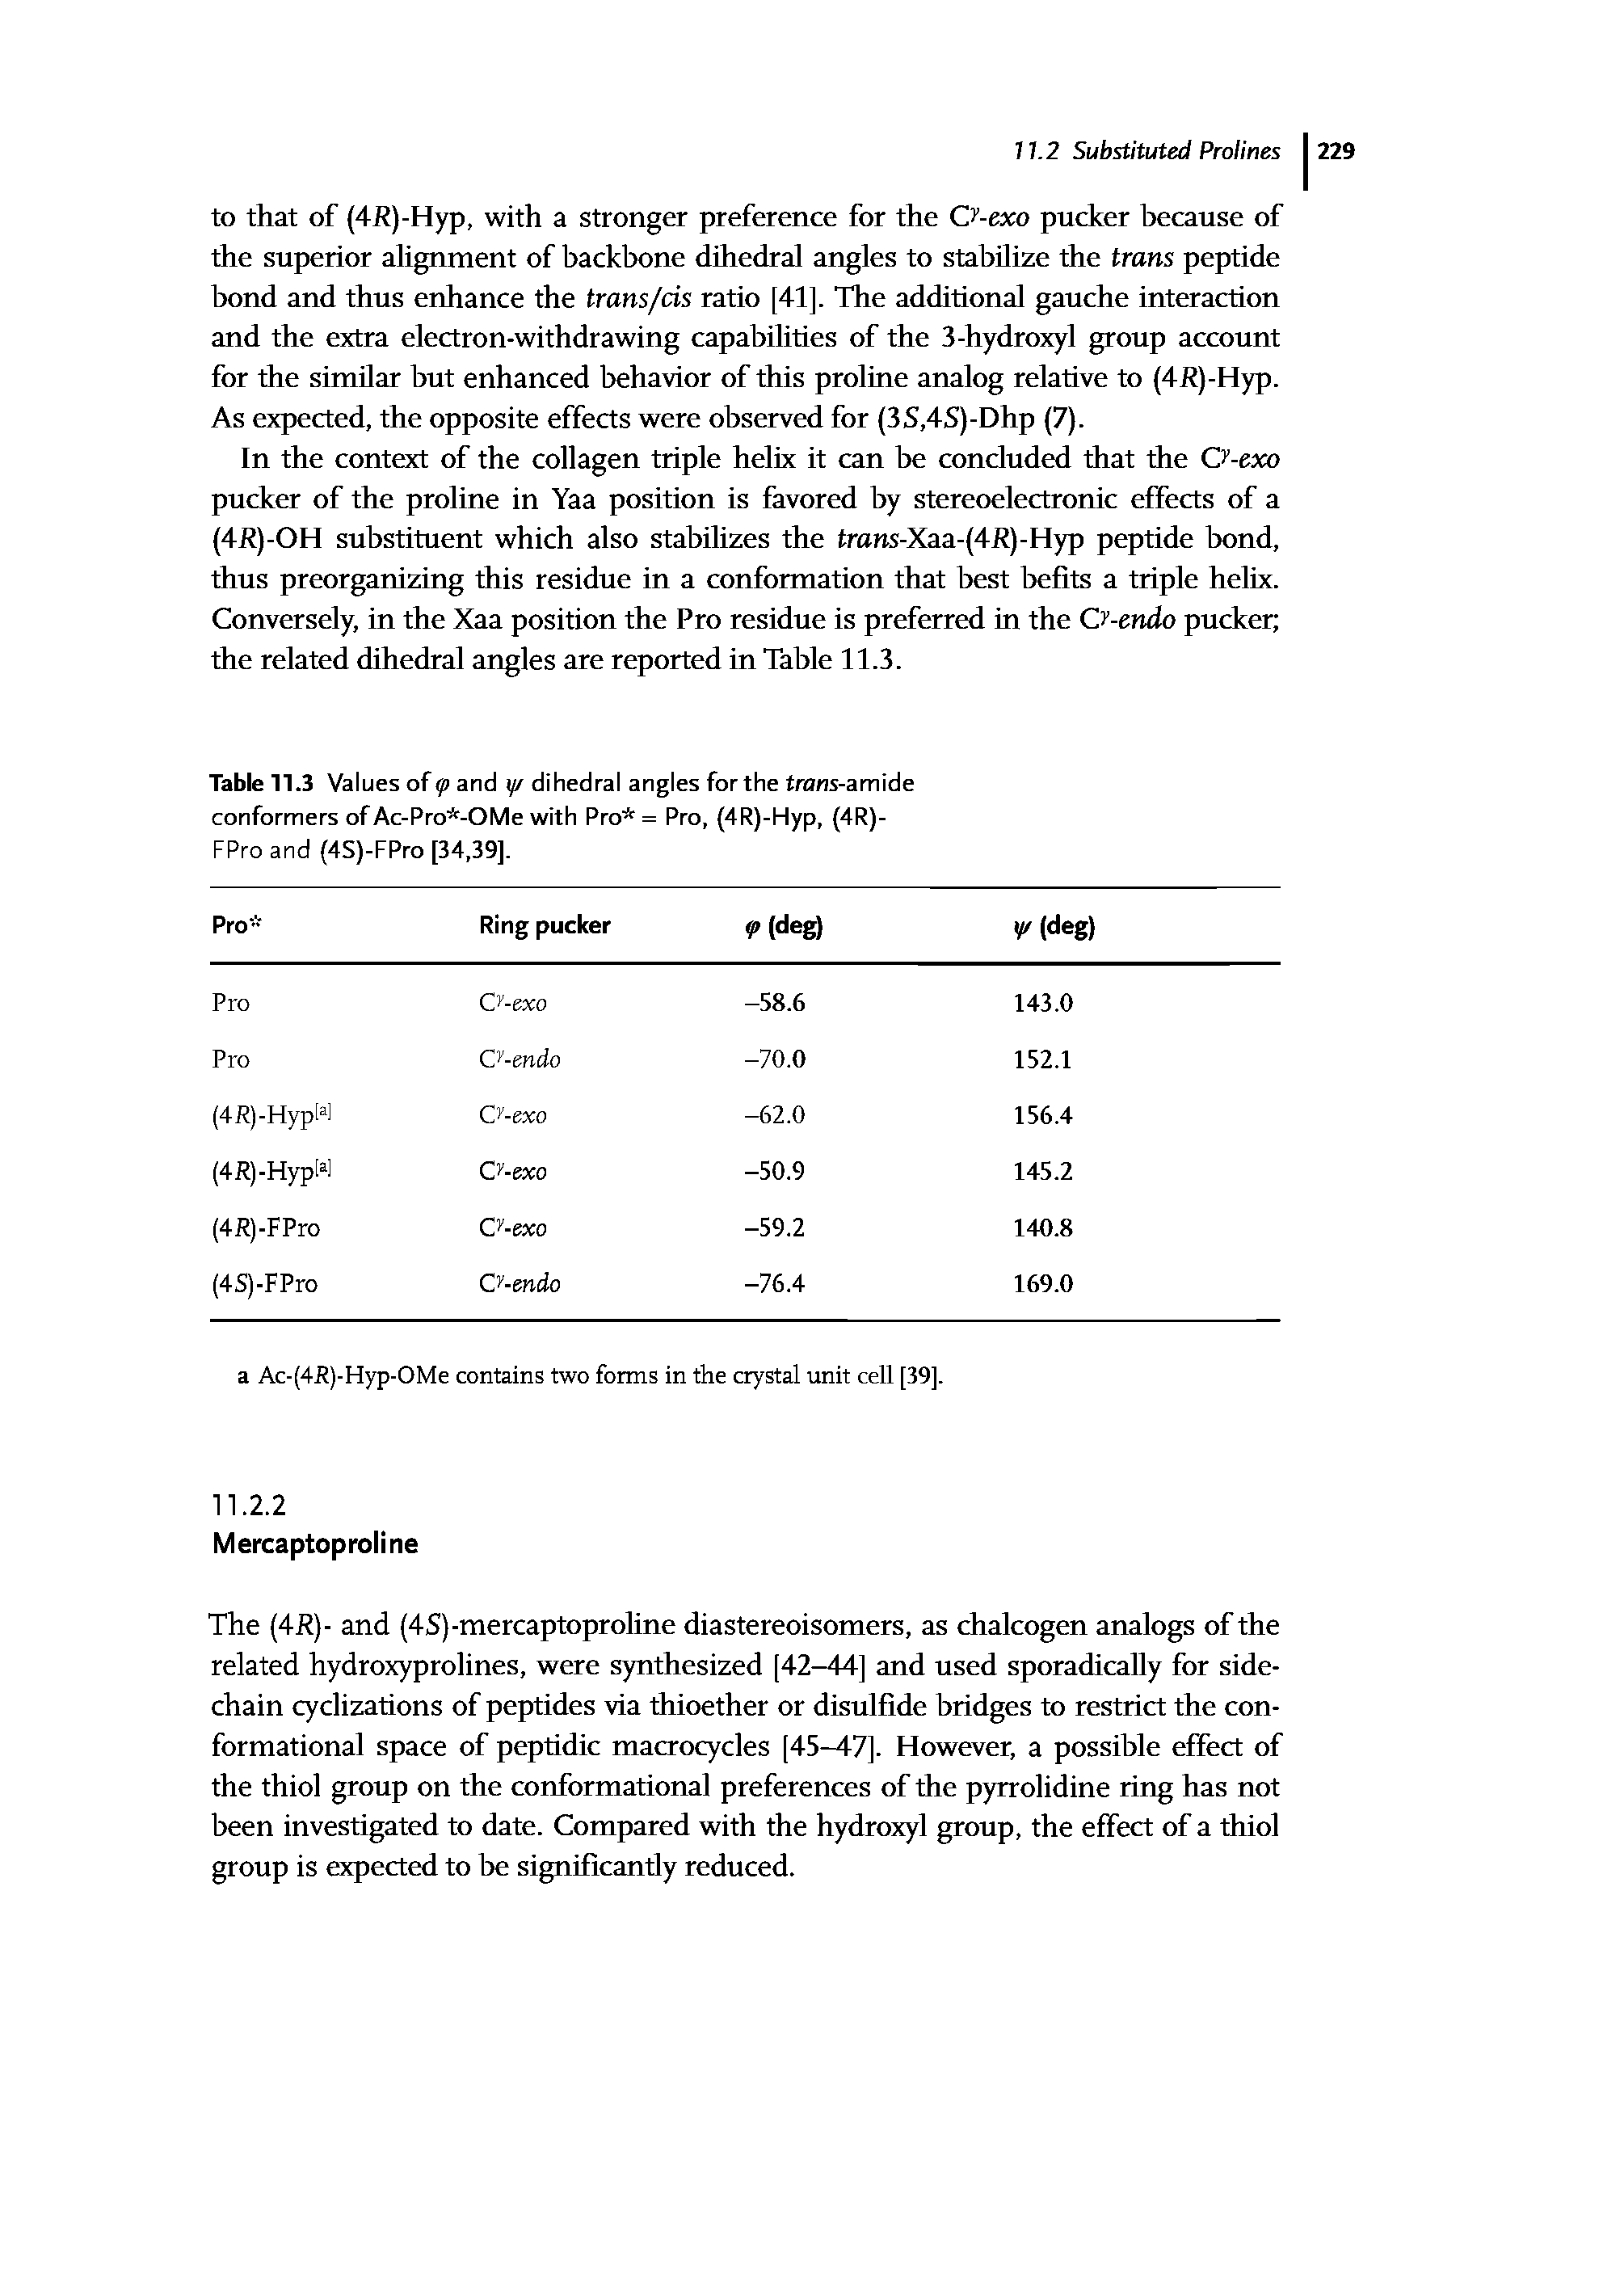 Table 11.3 Values of <j> and (// dihedral angles for the trans-amide conformers of Ac-Pro -OMe with Pro = Pro, (4R)-Hyp, (4R)-FPro and (4S)-FPro [34,39],...